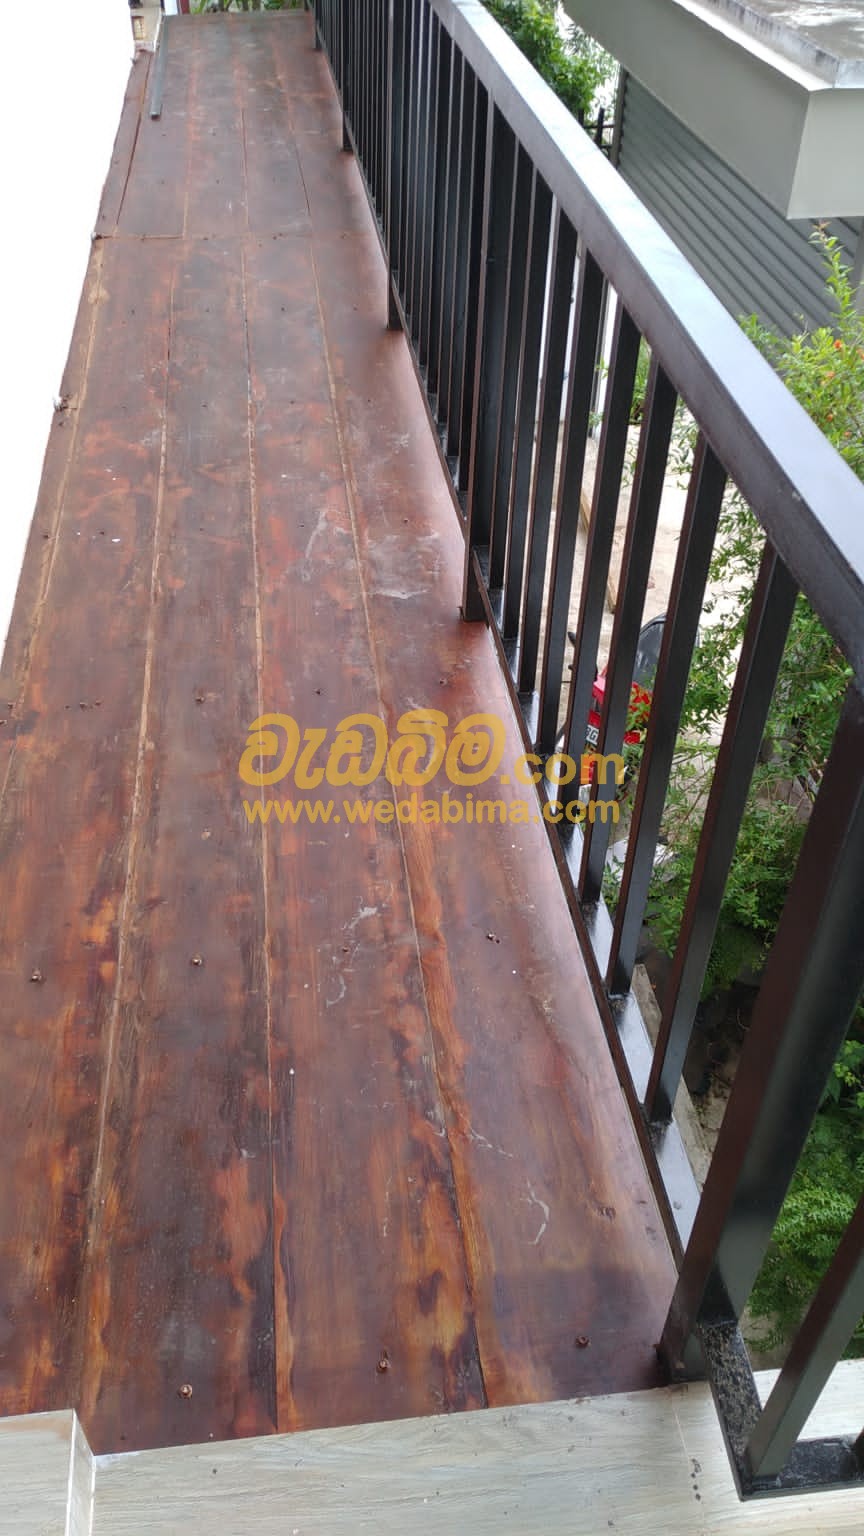 Cover image for Handrail Design for Stairs - Gampaha